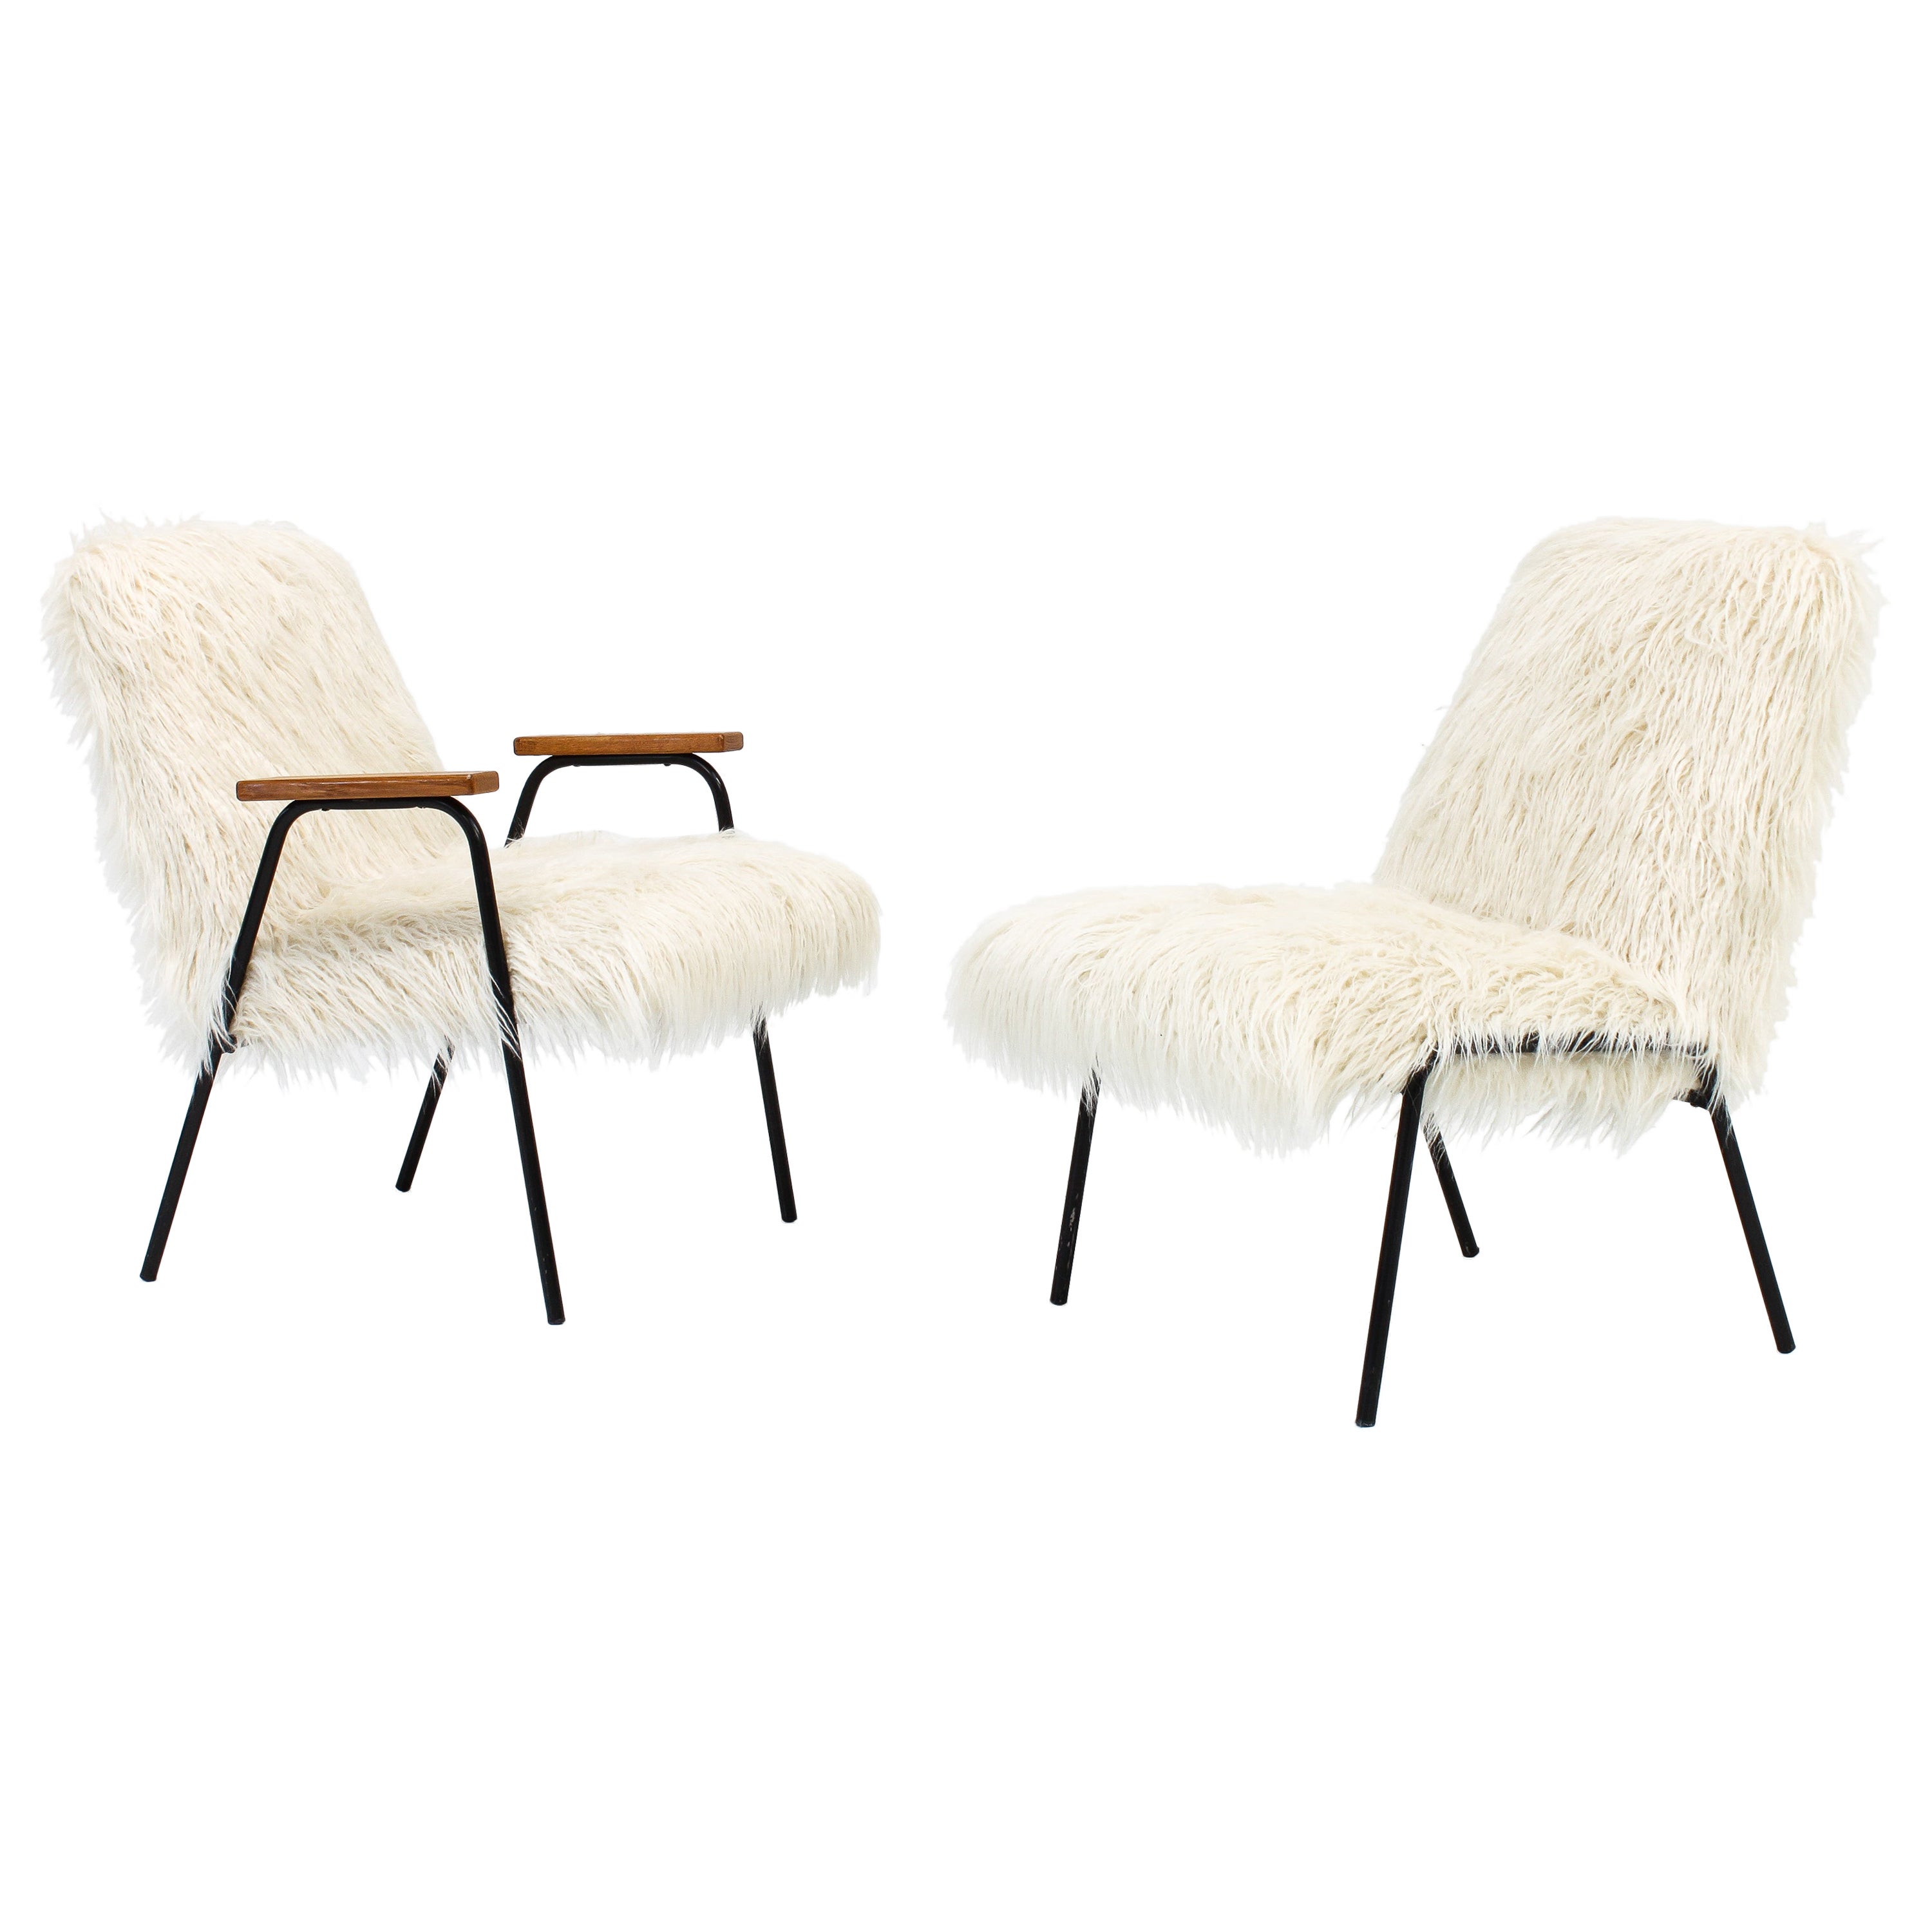 "Robert" Lounge Set Designed by Pierre Guariche Upholstered in Pierre Frey